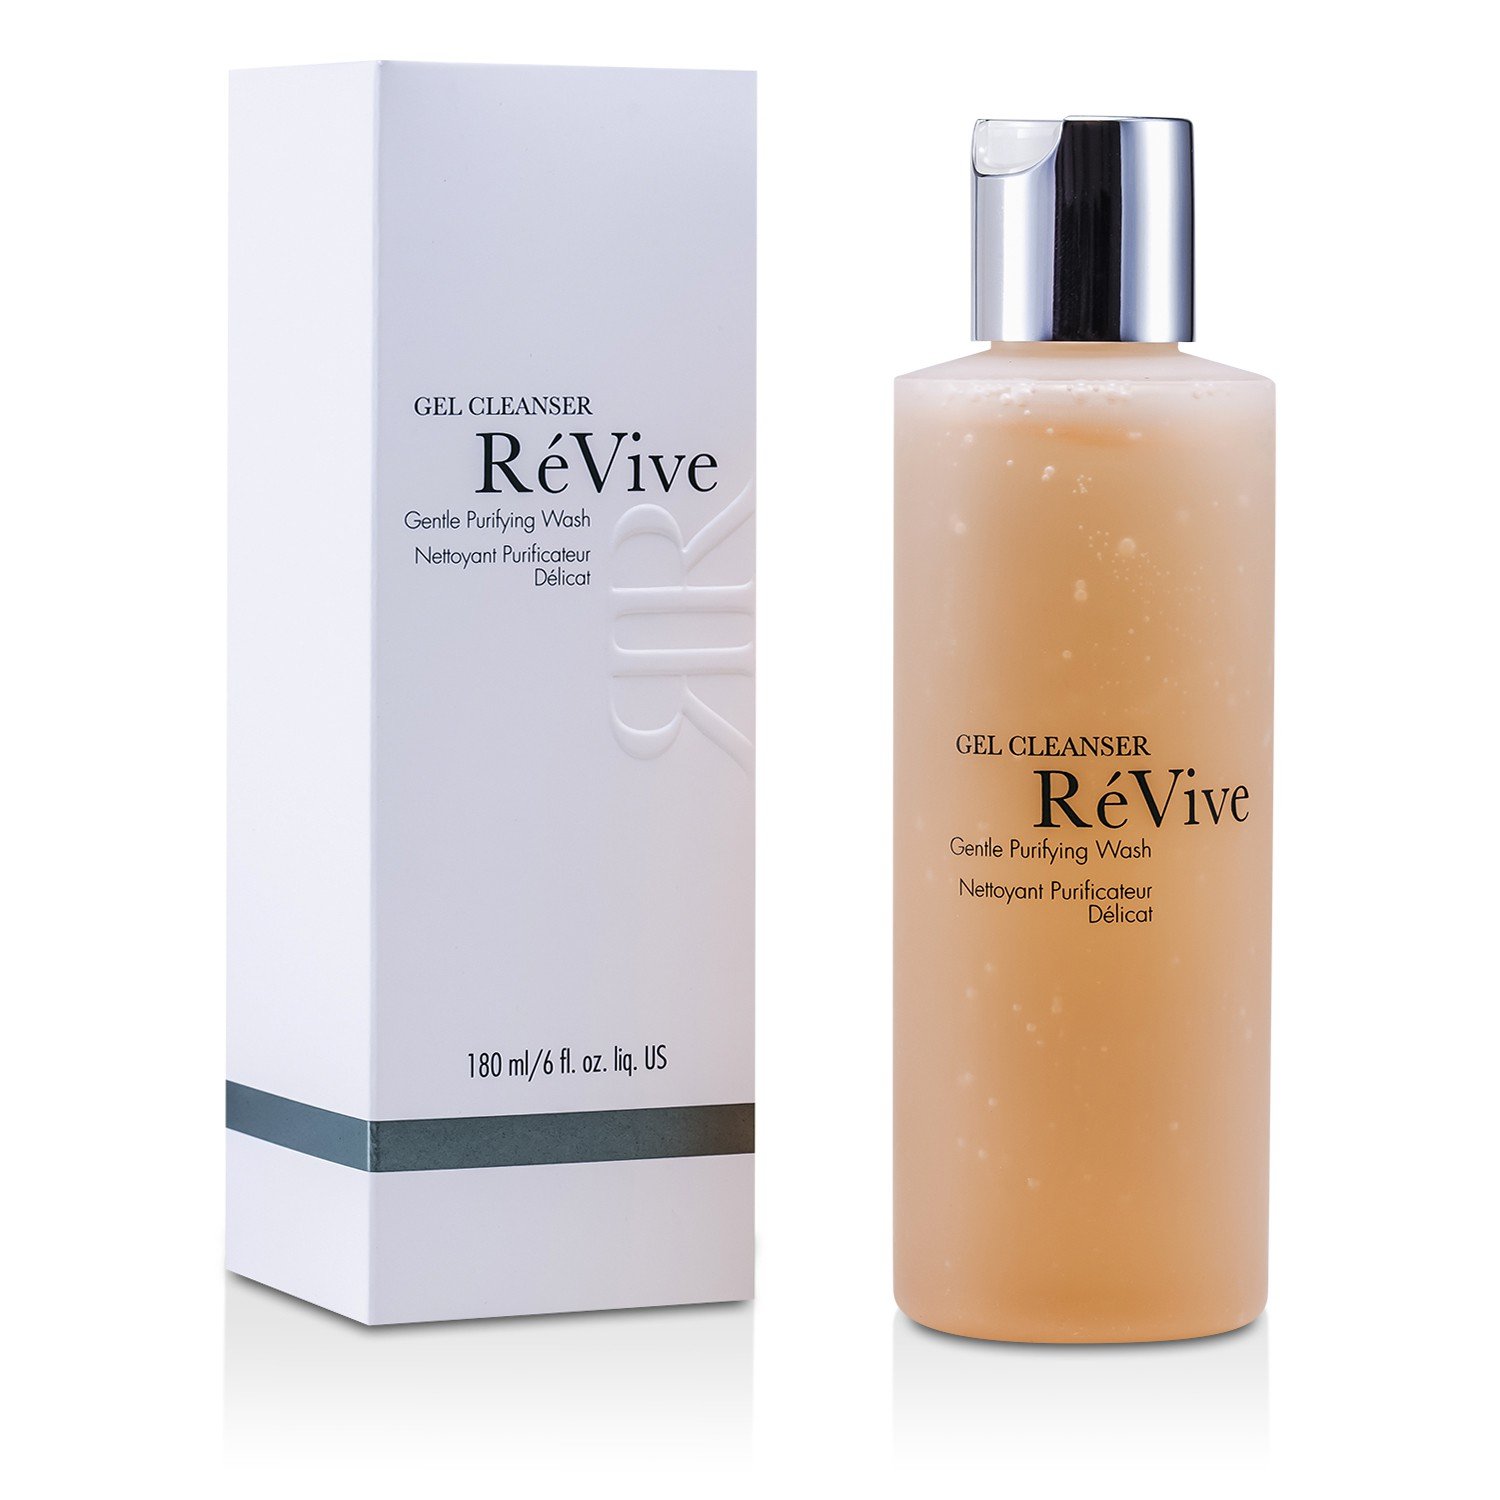 Photos - Facial / Body Cleansing Product ReVive Gel Cleanser Gentle Purifying Wash